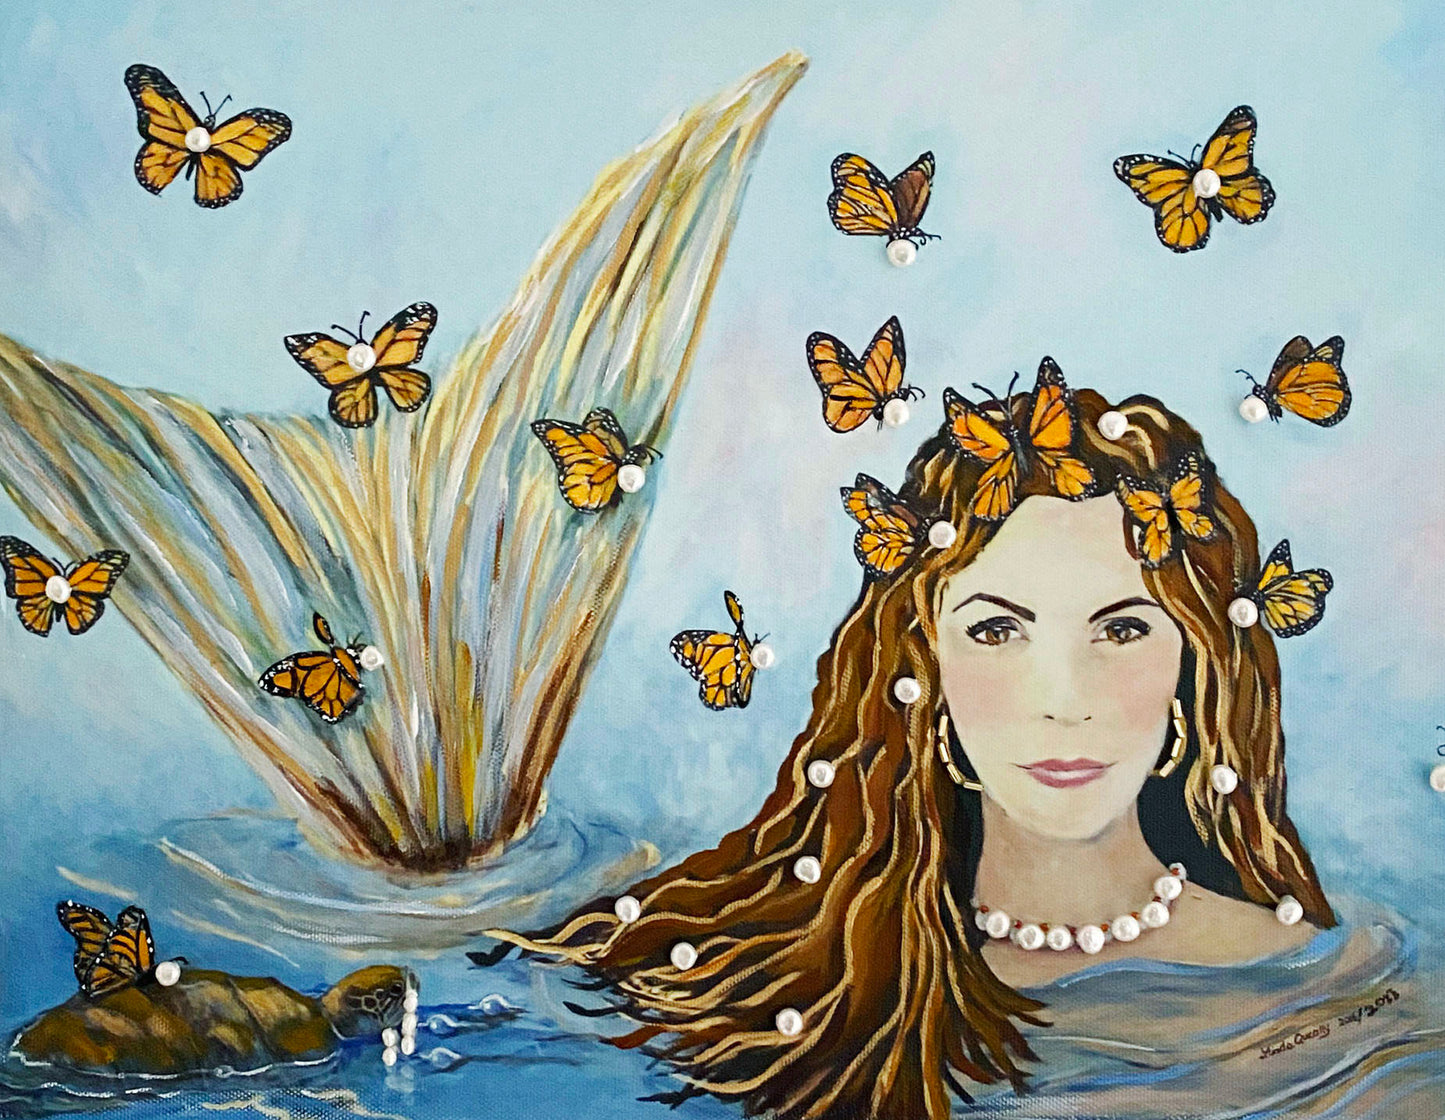 "More Precious than Gold" Embellished Giclee Print by Linda Queally | 11"x14" |